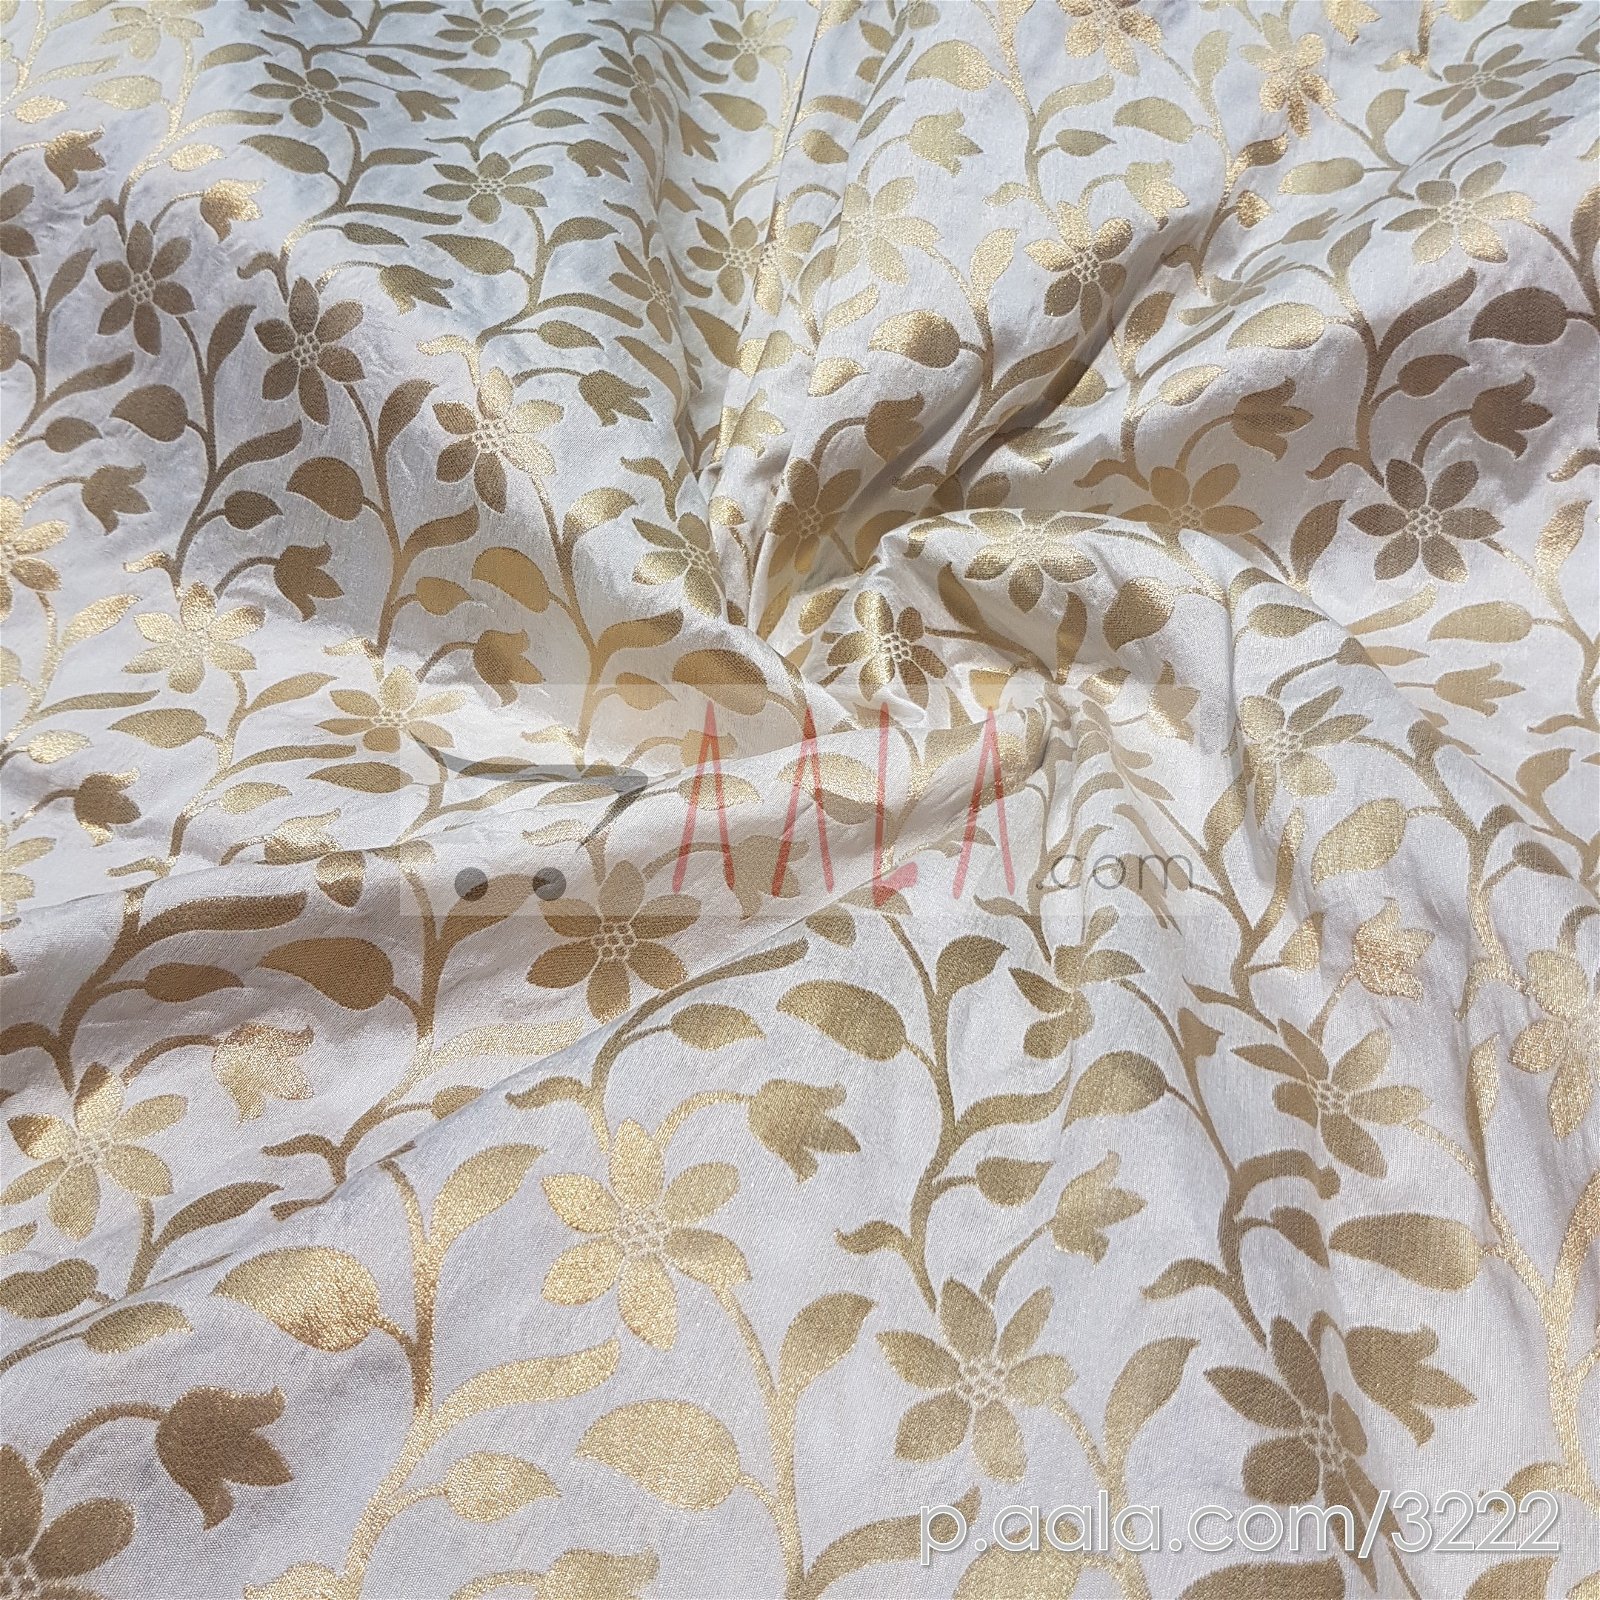 Brocade Silk Viscose 44 Inches Dyeable Per Metre #3222